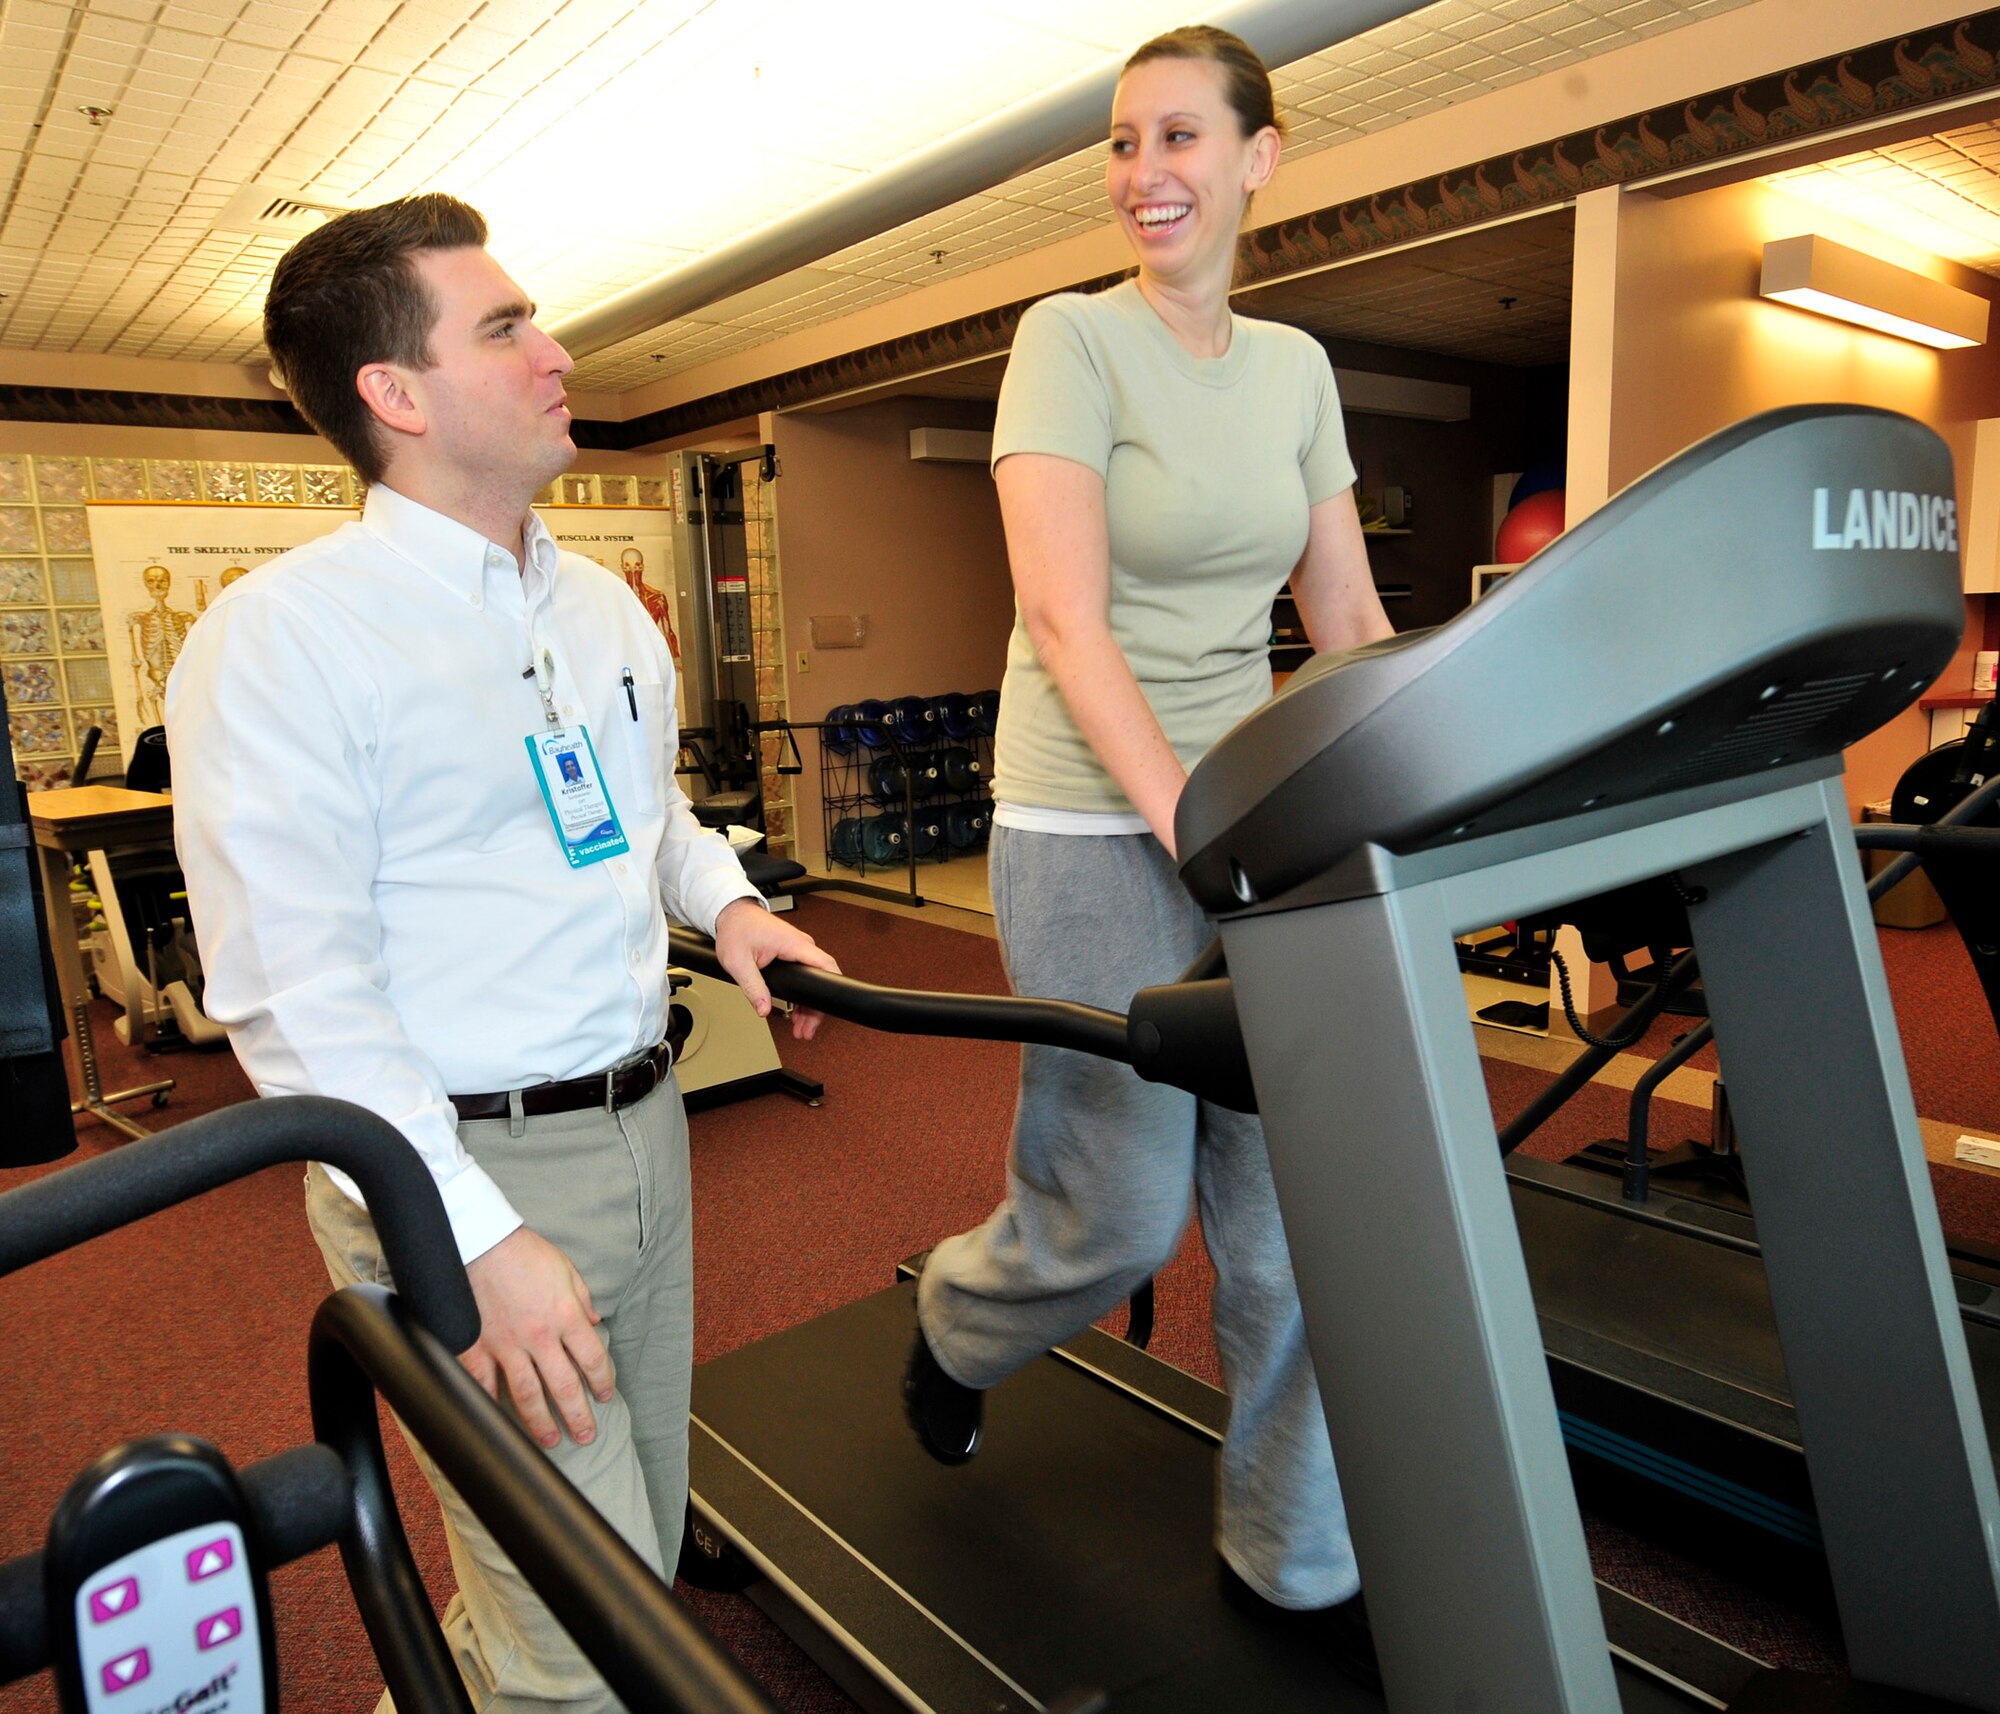 Lori Cord walks on a treadmill as Kristoffer Surdukowski, her physical therapist, looks on Feb. 1, 2013, at the Bayhealth Physical Therapy Center in Dover, Del. Walking is one of the activities that Cord must do to help her recover from Guillain-Barre Syndrome. (U.S. Air Force photo by Tech. Sgt. Chuck Walker)